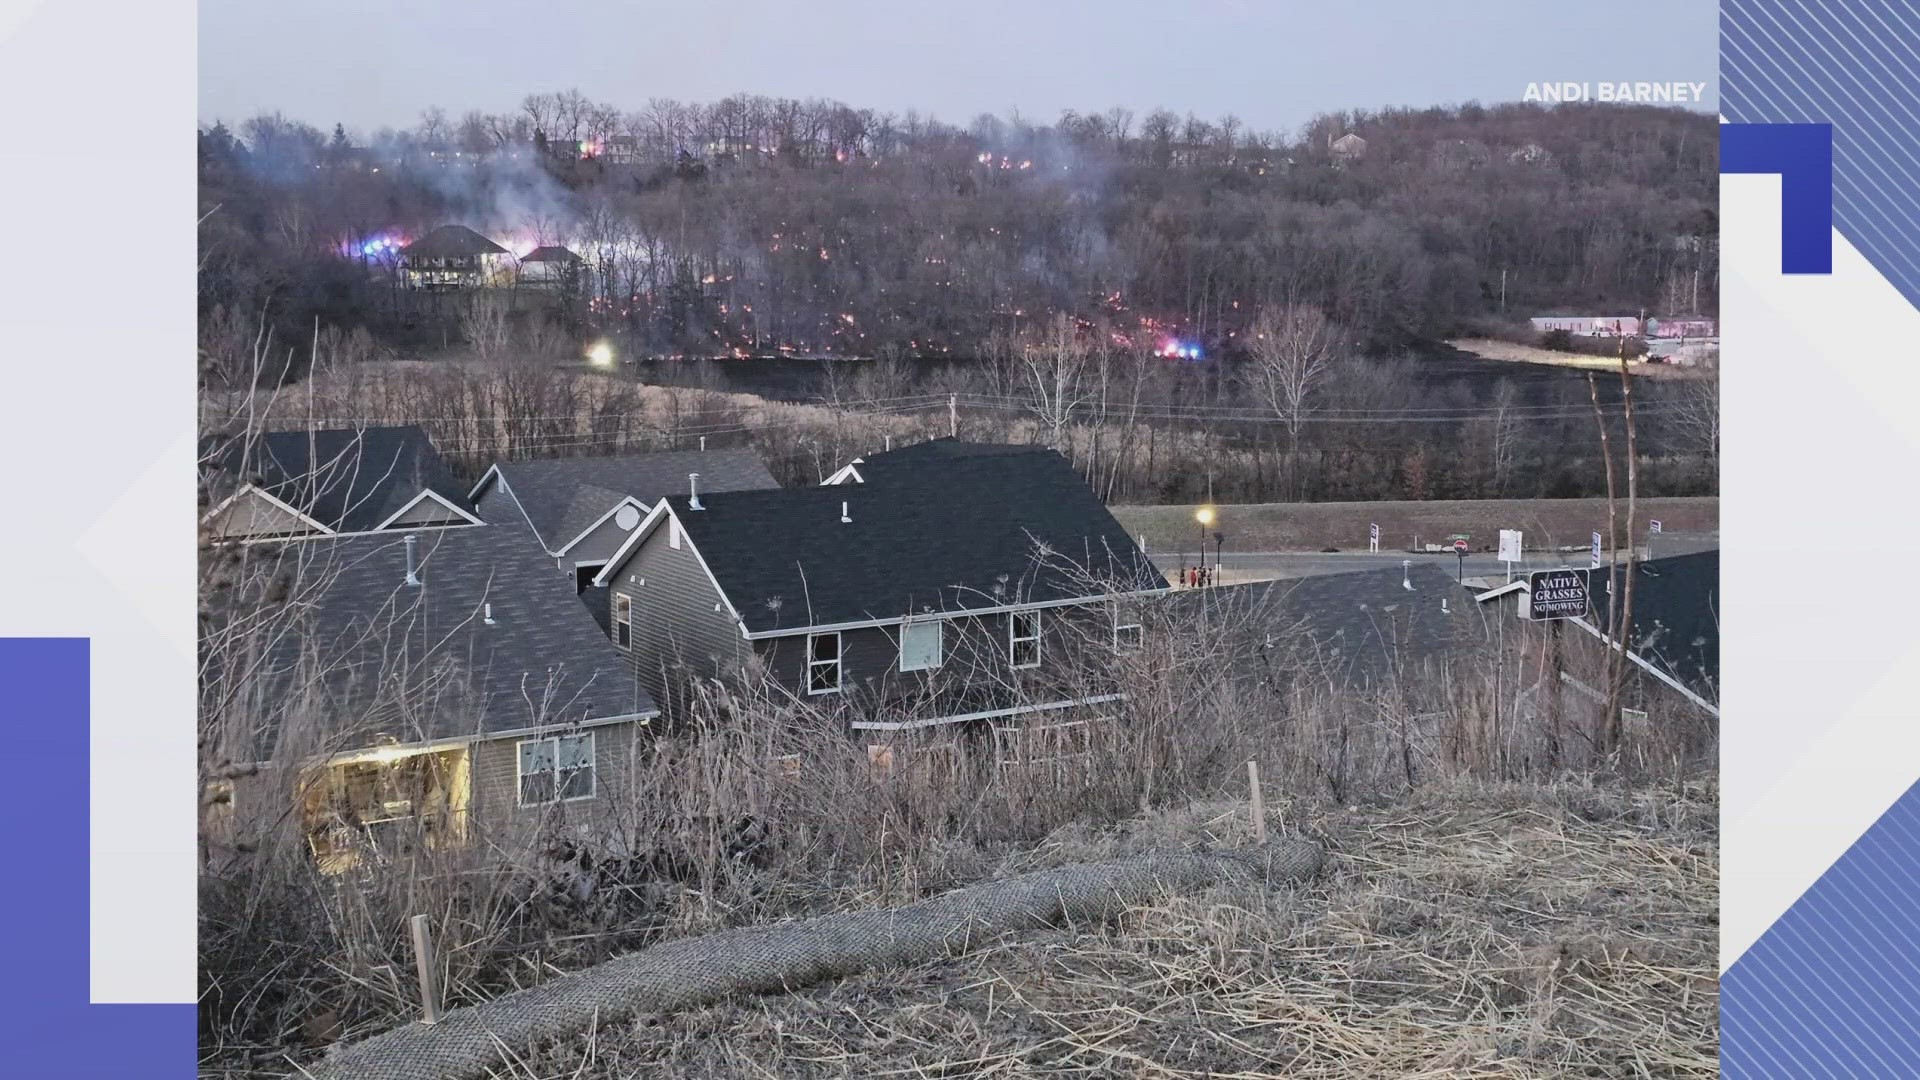 Crews battled a fire near Washington Park for 5 hours Monday. A fire in Fenton Sunday was knocked down.